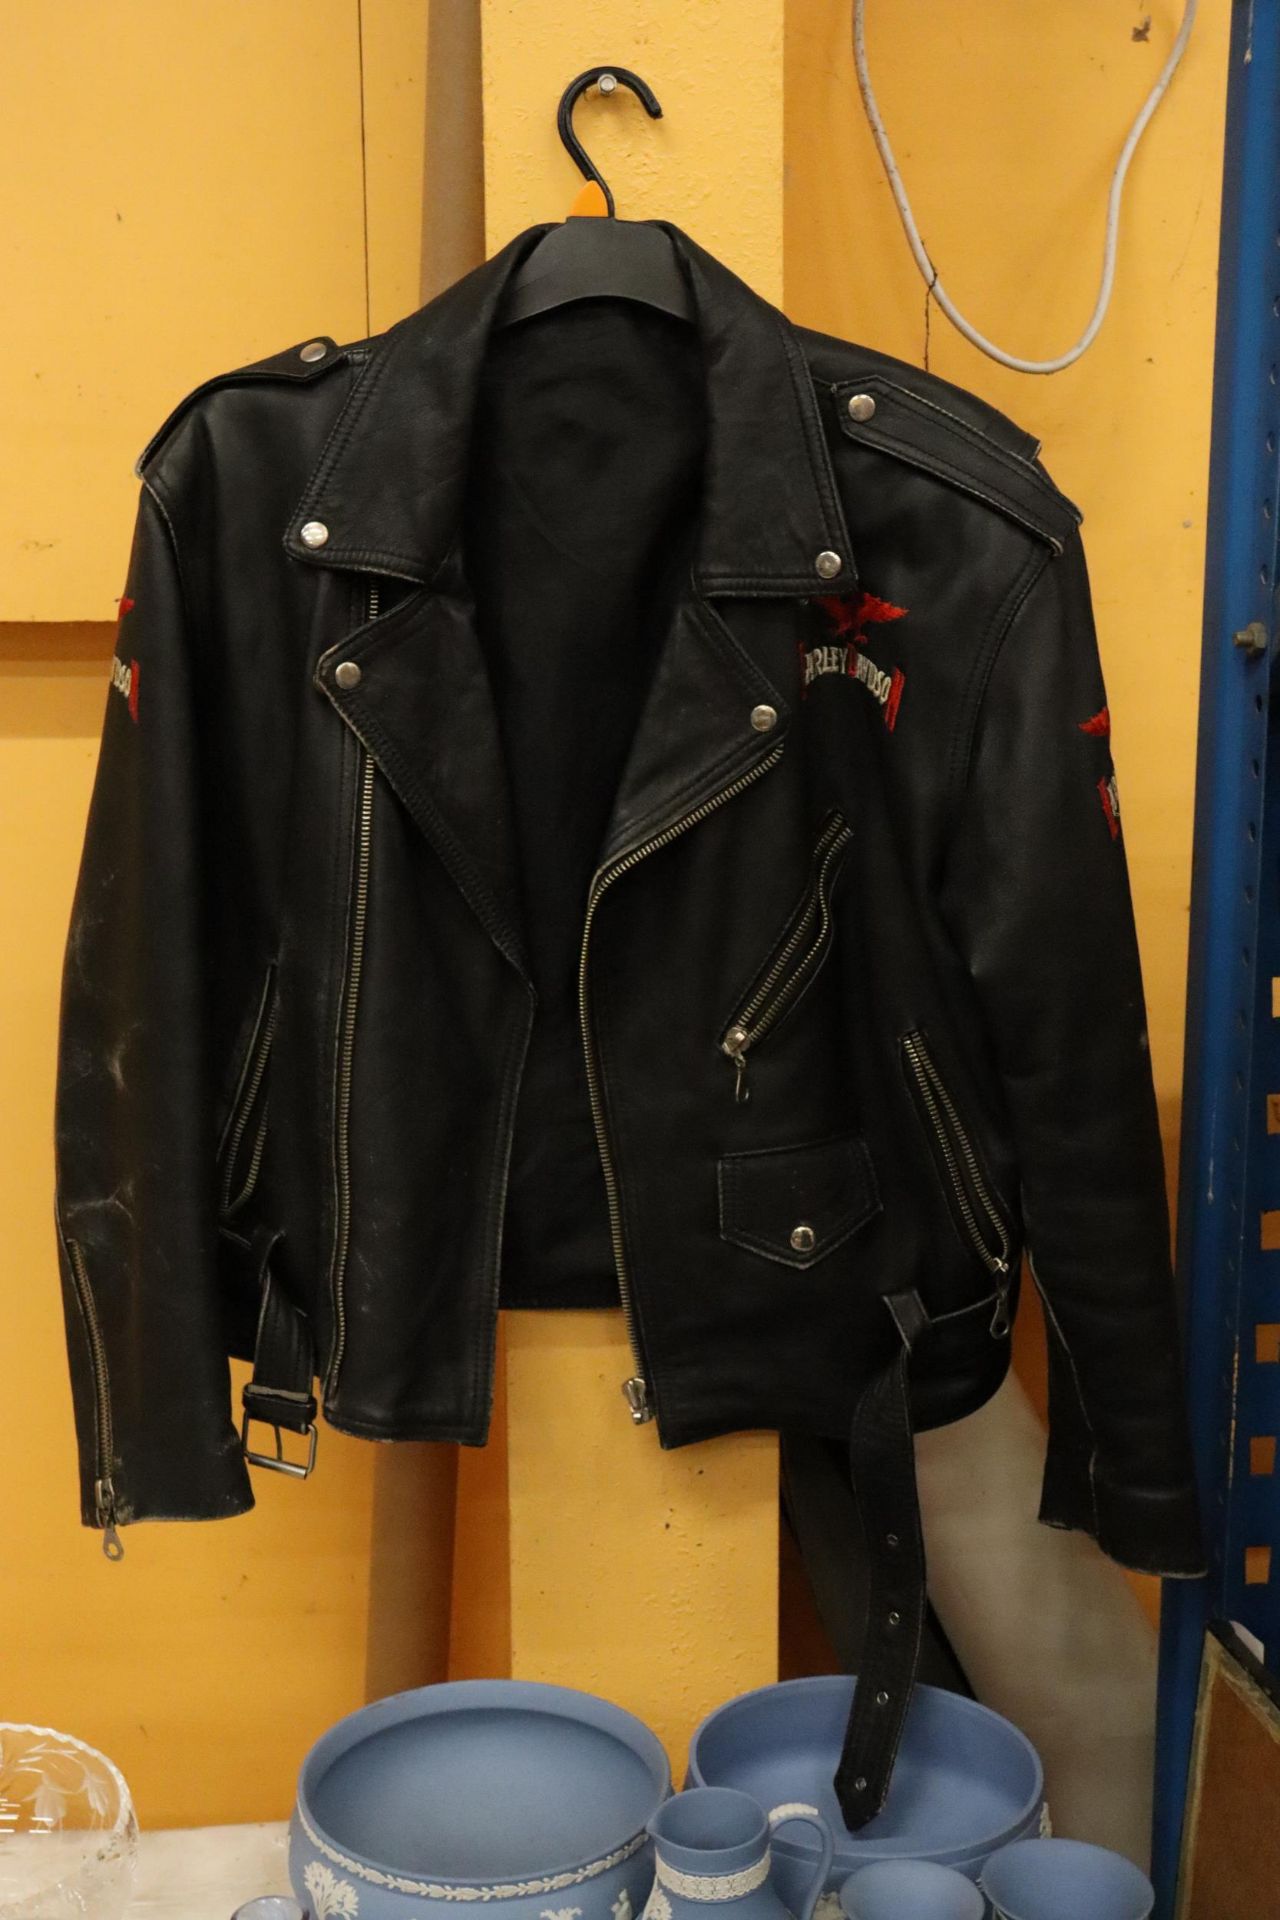 A VINTAGE HARLEY DAVIDSON LEATHER MOTOR CYCLE JACKET WITH LOGO TO THE BACK - Image 5 of 11